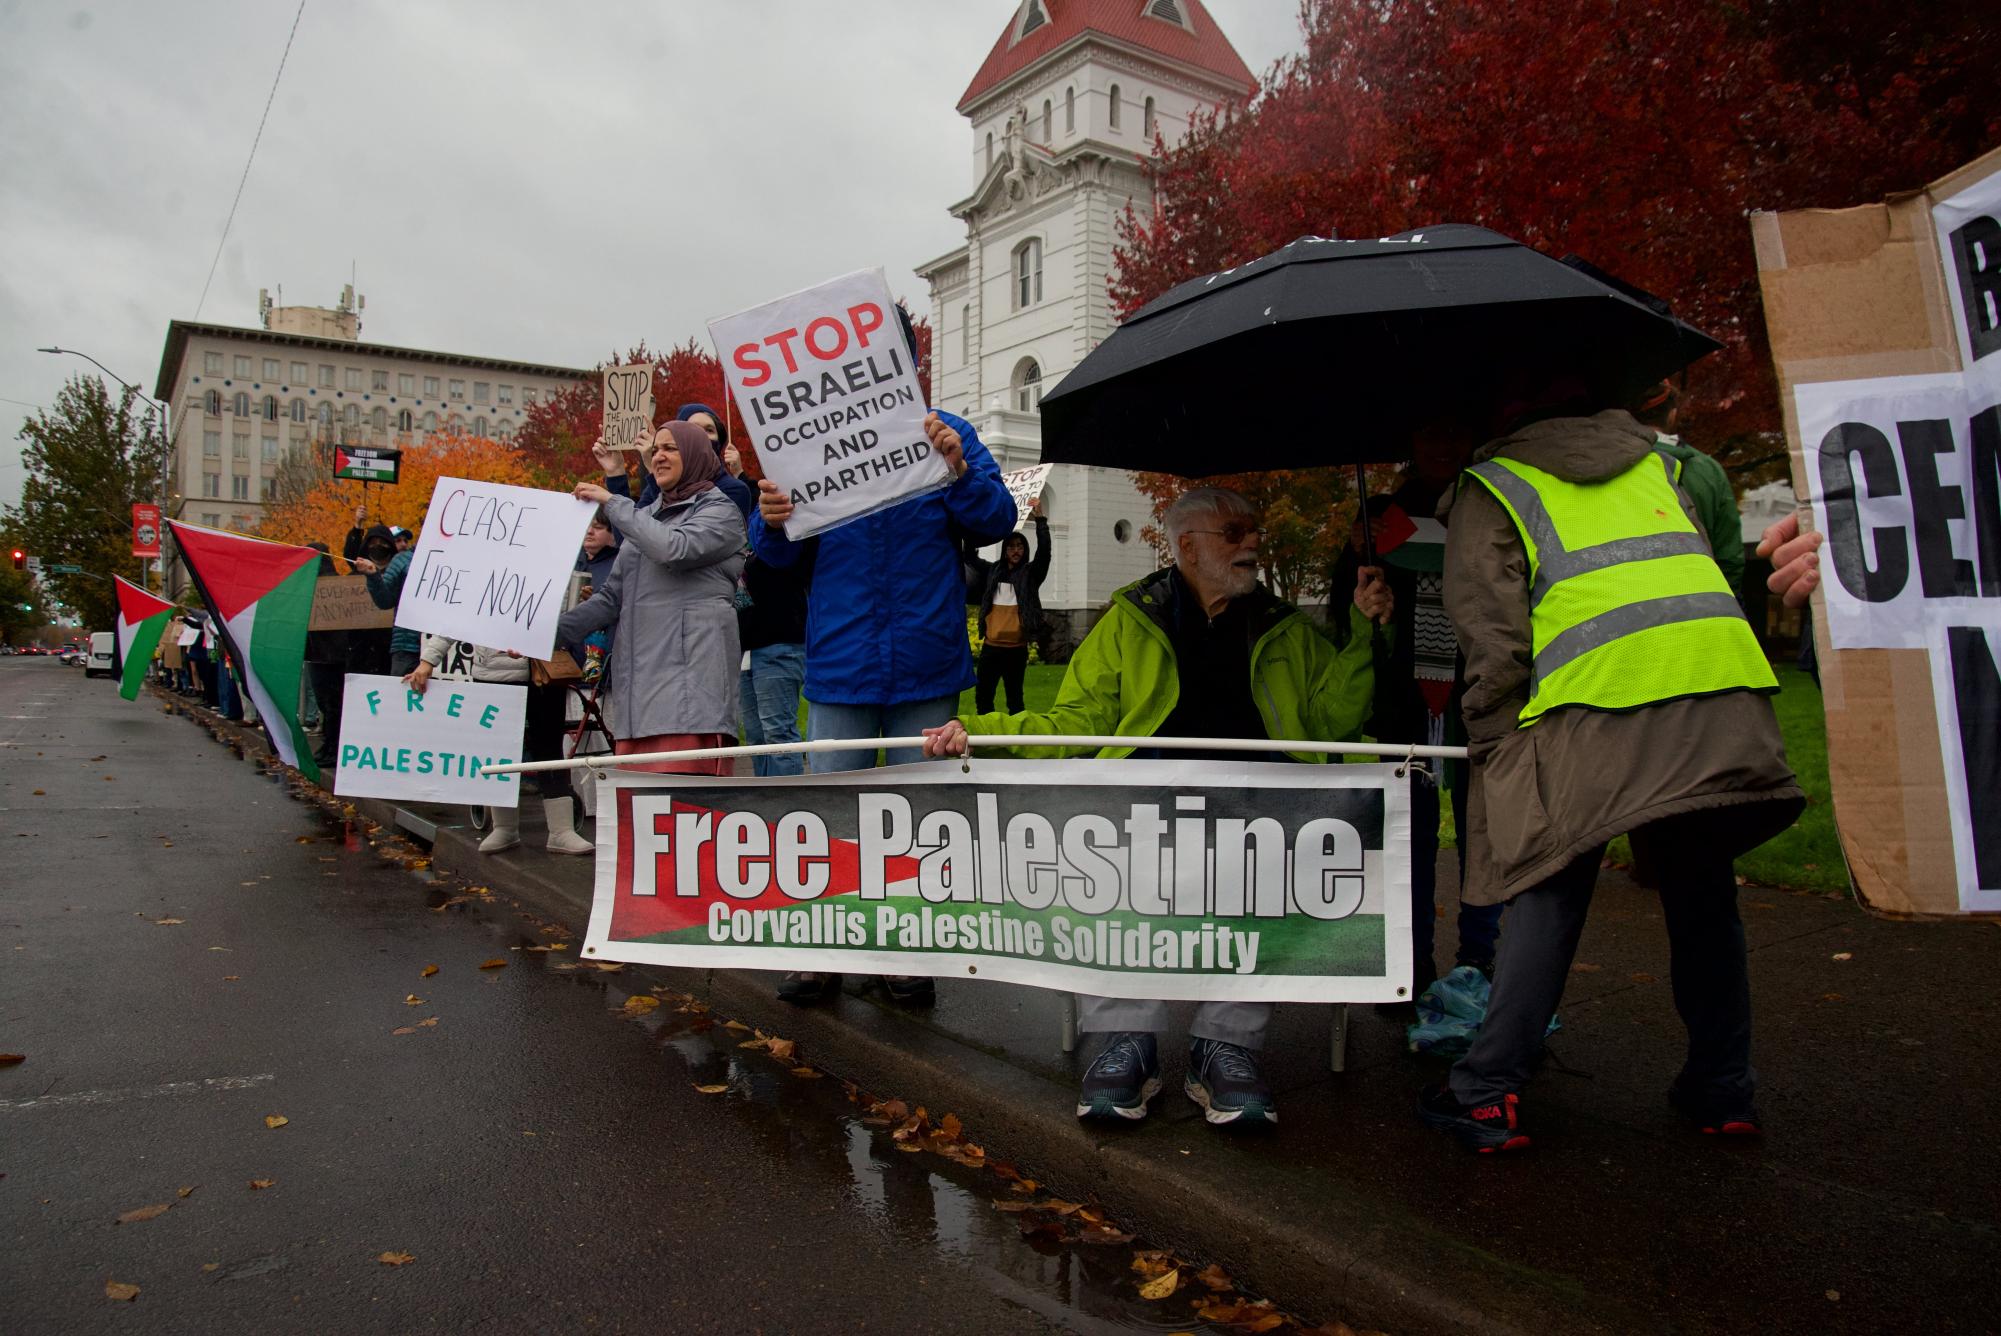 Free Palestine protest on Saturday, Nov. 4 in downtown Corvallis outside of the Benton County Courthouse.